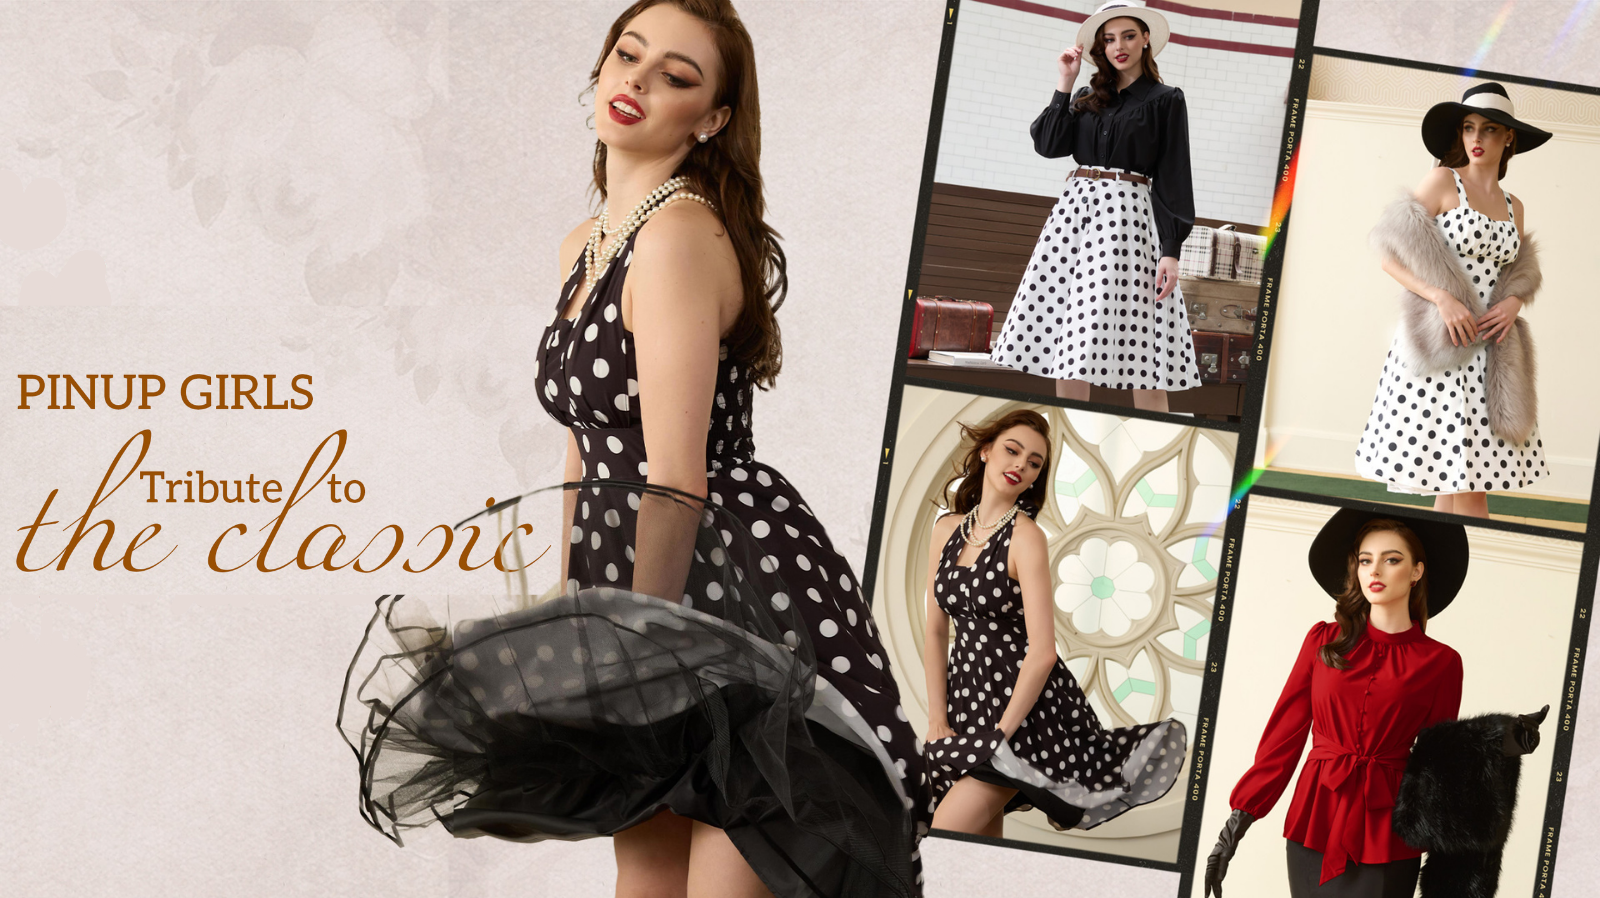 Unveil Your Inner Pinup Girl!